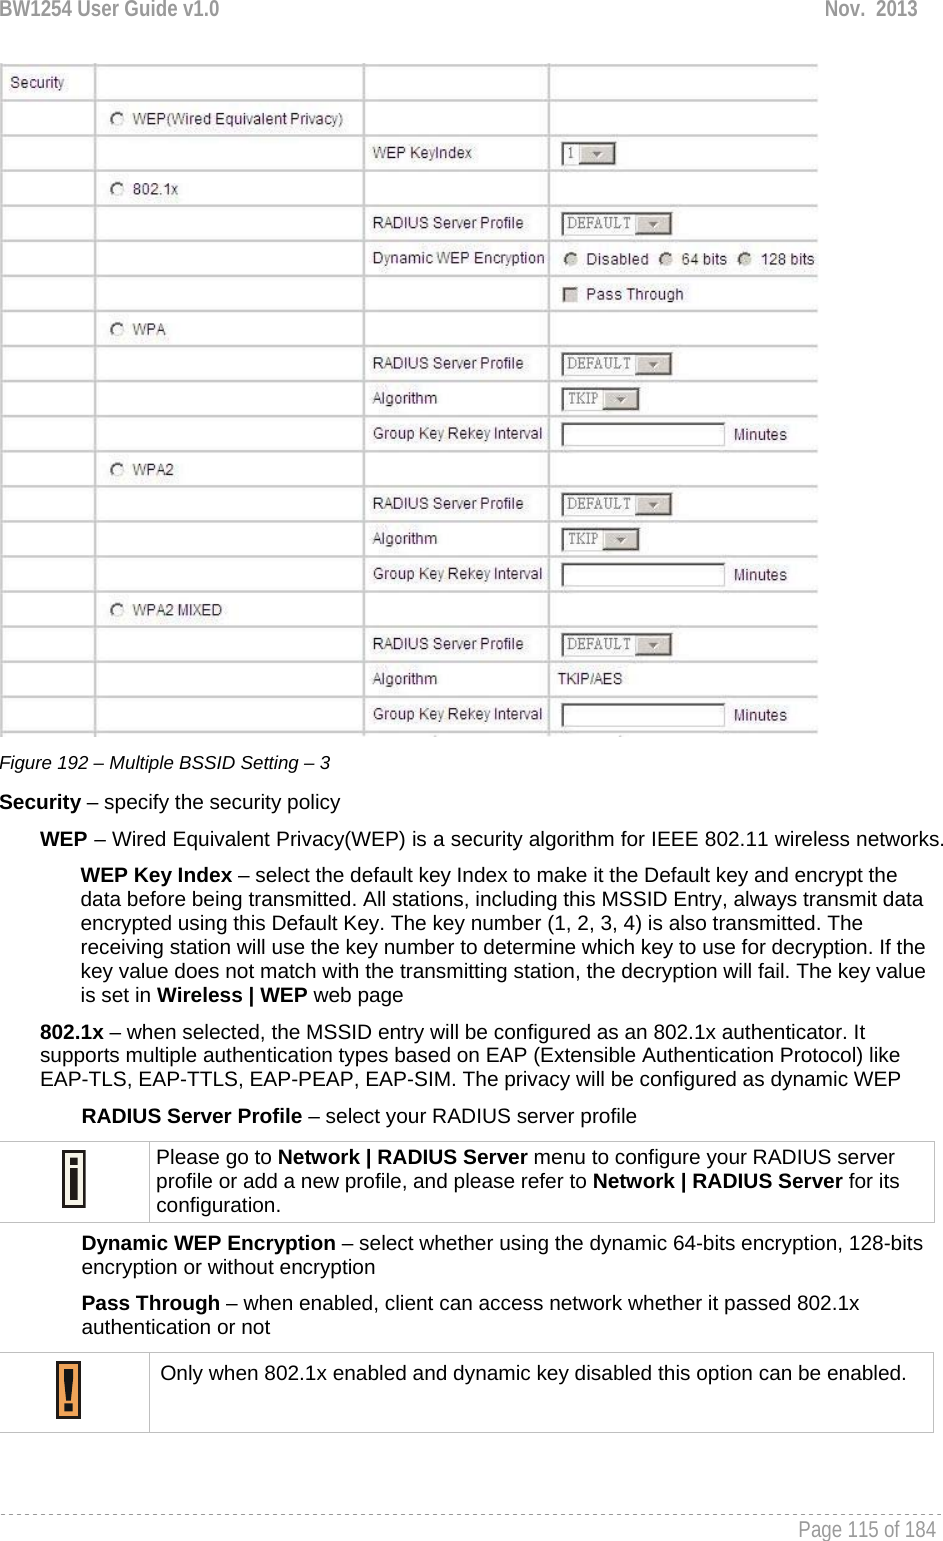 BW1254 User Guide v1.0  Nov.  2013     Page 115 of 184    Figure 192 – Multiple BSSID Setting – 3 Security – specify the security policy WEP – Wired Equivalent Privacy(WEP) is a security algorithm for IEEE 802.11 wireless networks. WEP Key Index – select the default key Index to make it the Default key and encrypt the data before being transmitted. All stations, including this MSSID Entry, always transmit data encrypted using this Default Key. The key number (1, 2, 3, 4) is also transmitted. The receiving station will use the key number to determine which key to use for decryption. If the key value does not match with the transmitting station, the decryption will fail. The key value is set in Wireless | WEP web page 802.1x – when selected, the MSSID entry will be configured as an 802.1x authenticator. It supports multiple authentication types based on EAP (Extensible Authentication Protocol) like EAP-TLS, EAP-TTLS, EAP-PEAP, EAP-SIM. The privacy will be configured as dynamic WEP RADIUS Server Profile – select your RADIUS server profile  Please go to Network | RADIUS Server menu to configure your RADIUS server profile or add a new profile, and please refer to Network | RADIUS Server for its configuration. Dynamic WEP Encryption – select whether using the dynamic 64-bits encryption, 128-bits encryption or without encryption Pass Through – when enabled, client can access network whether it passed 802.1x authentication or not  Only when 802.1x enabled and dynamic key disabled this option can be enabled.  